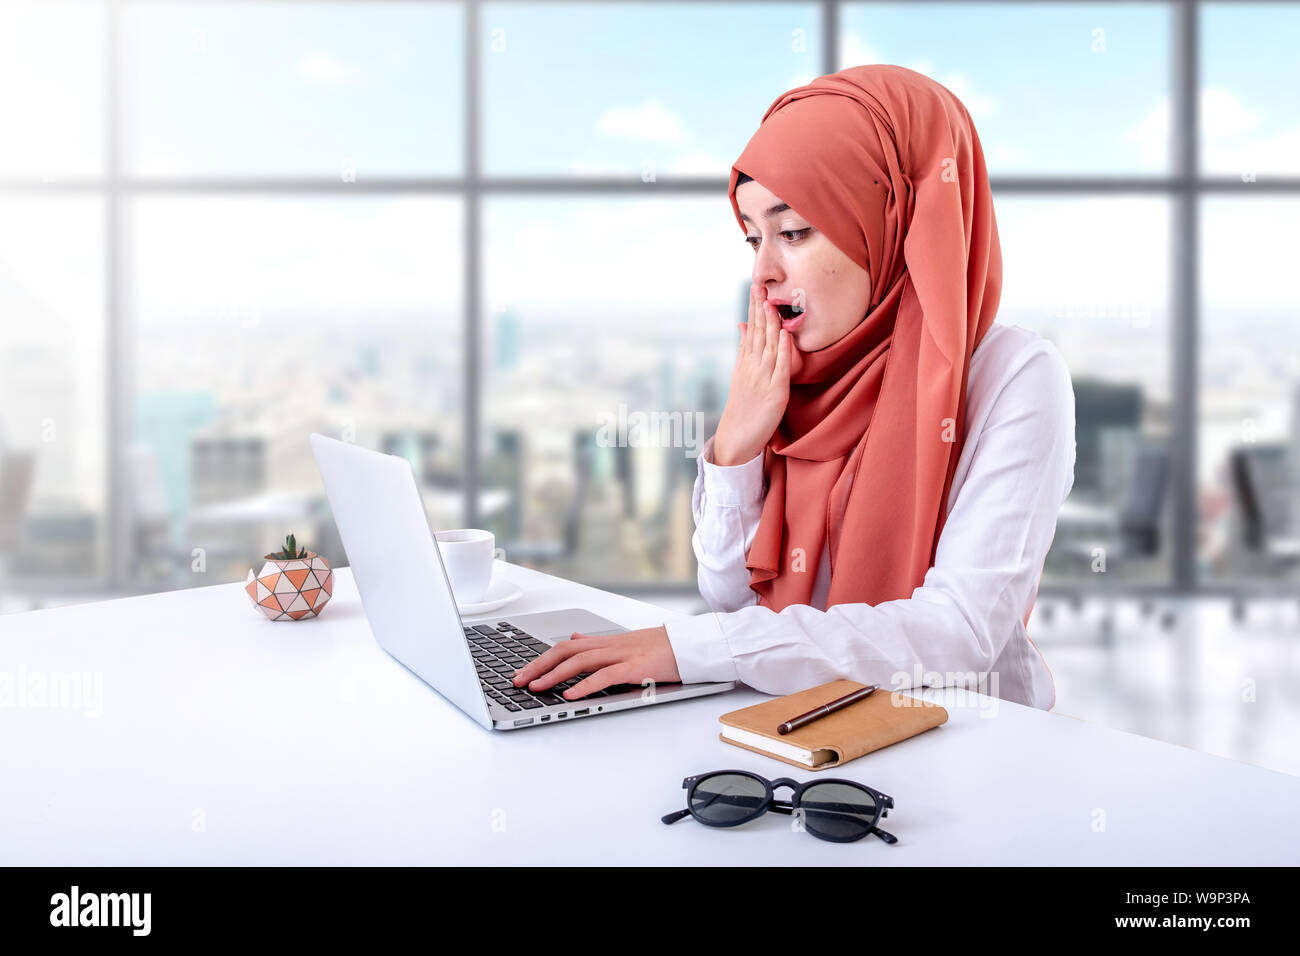 Muslim woman working with computer in office, hijab muslim girl confused or bewildered Stock Photo